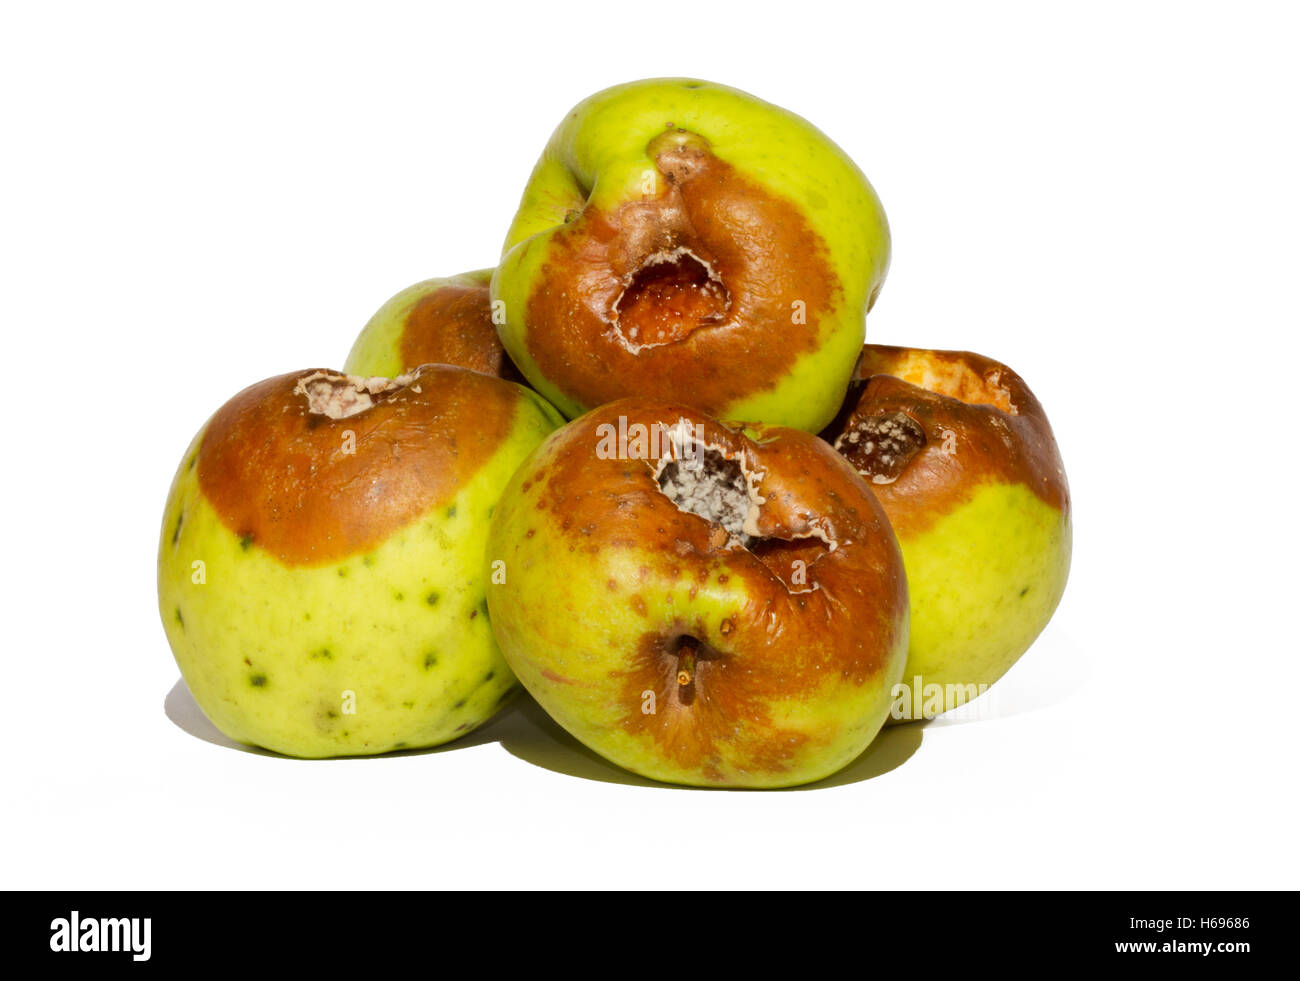 Five rotten apples on a white background Stock Photo